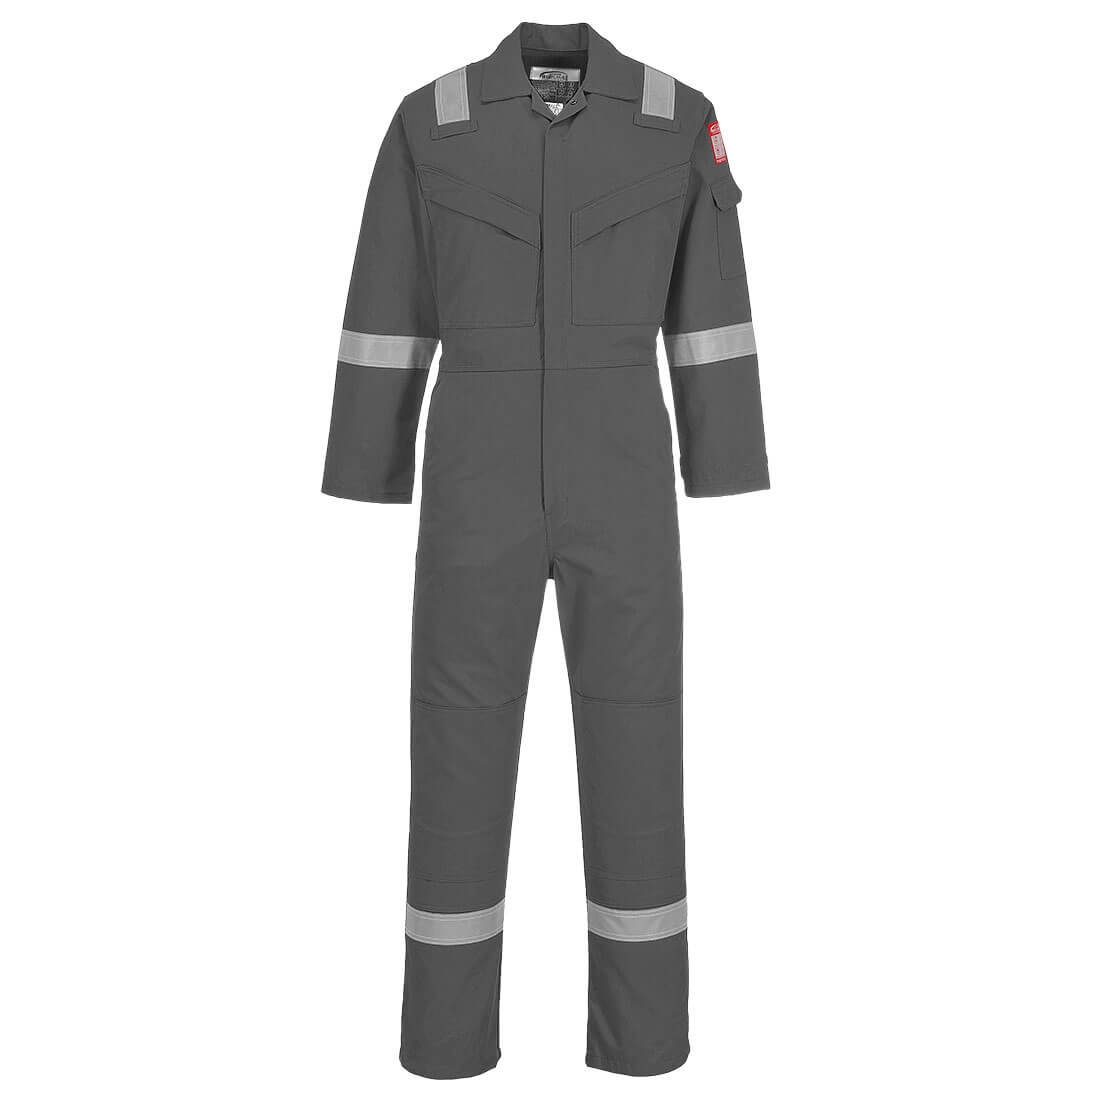 Image of Biz Flame Mens Aberdeen Flame Resistant Antistatic Coverall Grey XS 32"